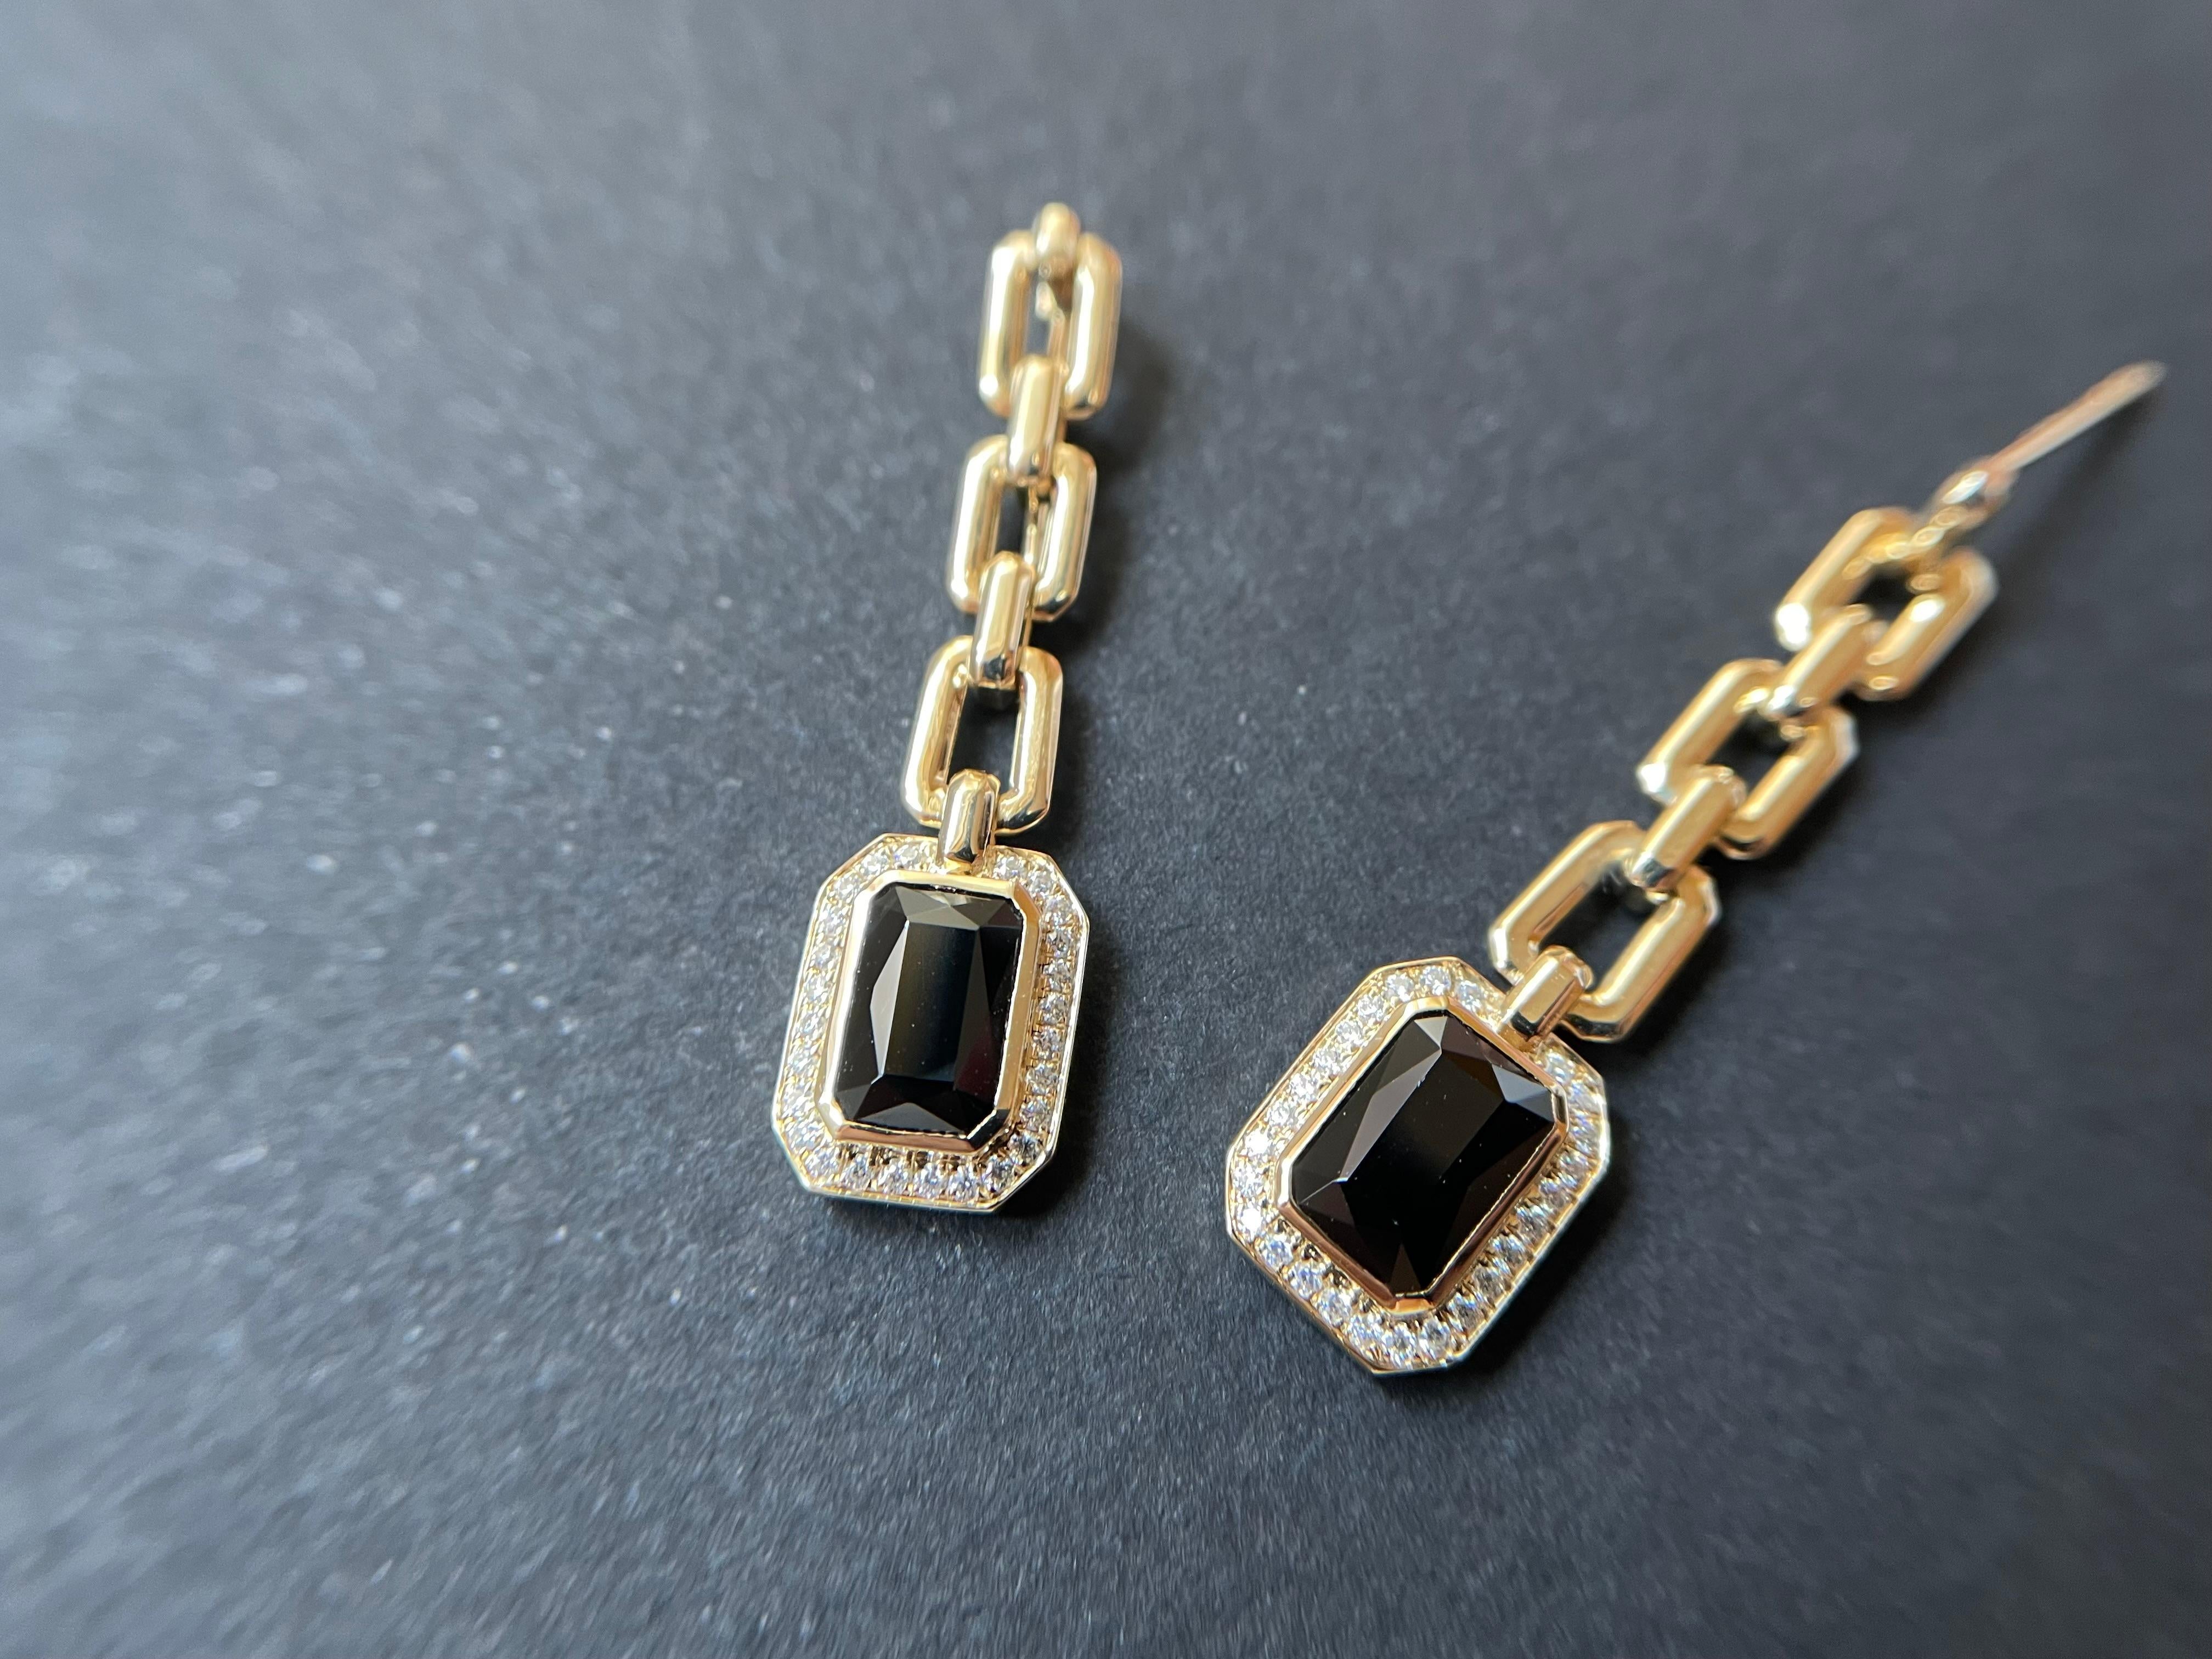 The custom-designed and handcrafted earrings are set in Myanmar black spinels. These luxurious ear studs are framed in 14K /18K yellow gold embellished with moissanite. It is simply just a one-of-a-kind gem piece. The vivid, intense black color